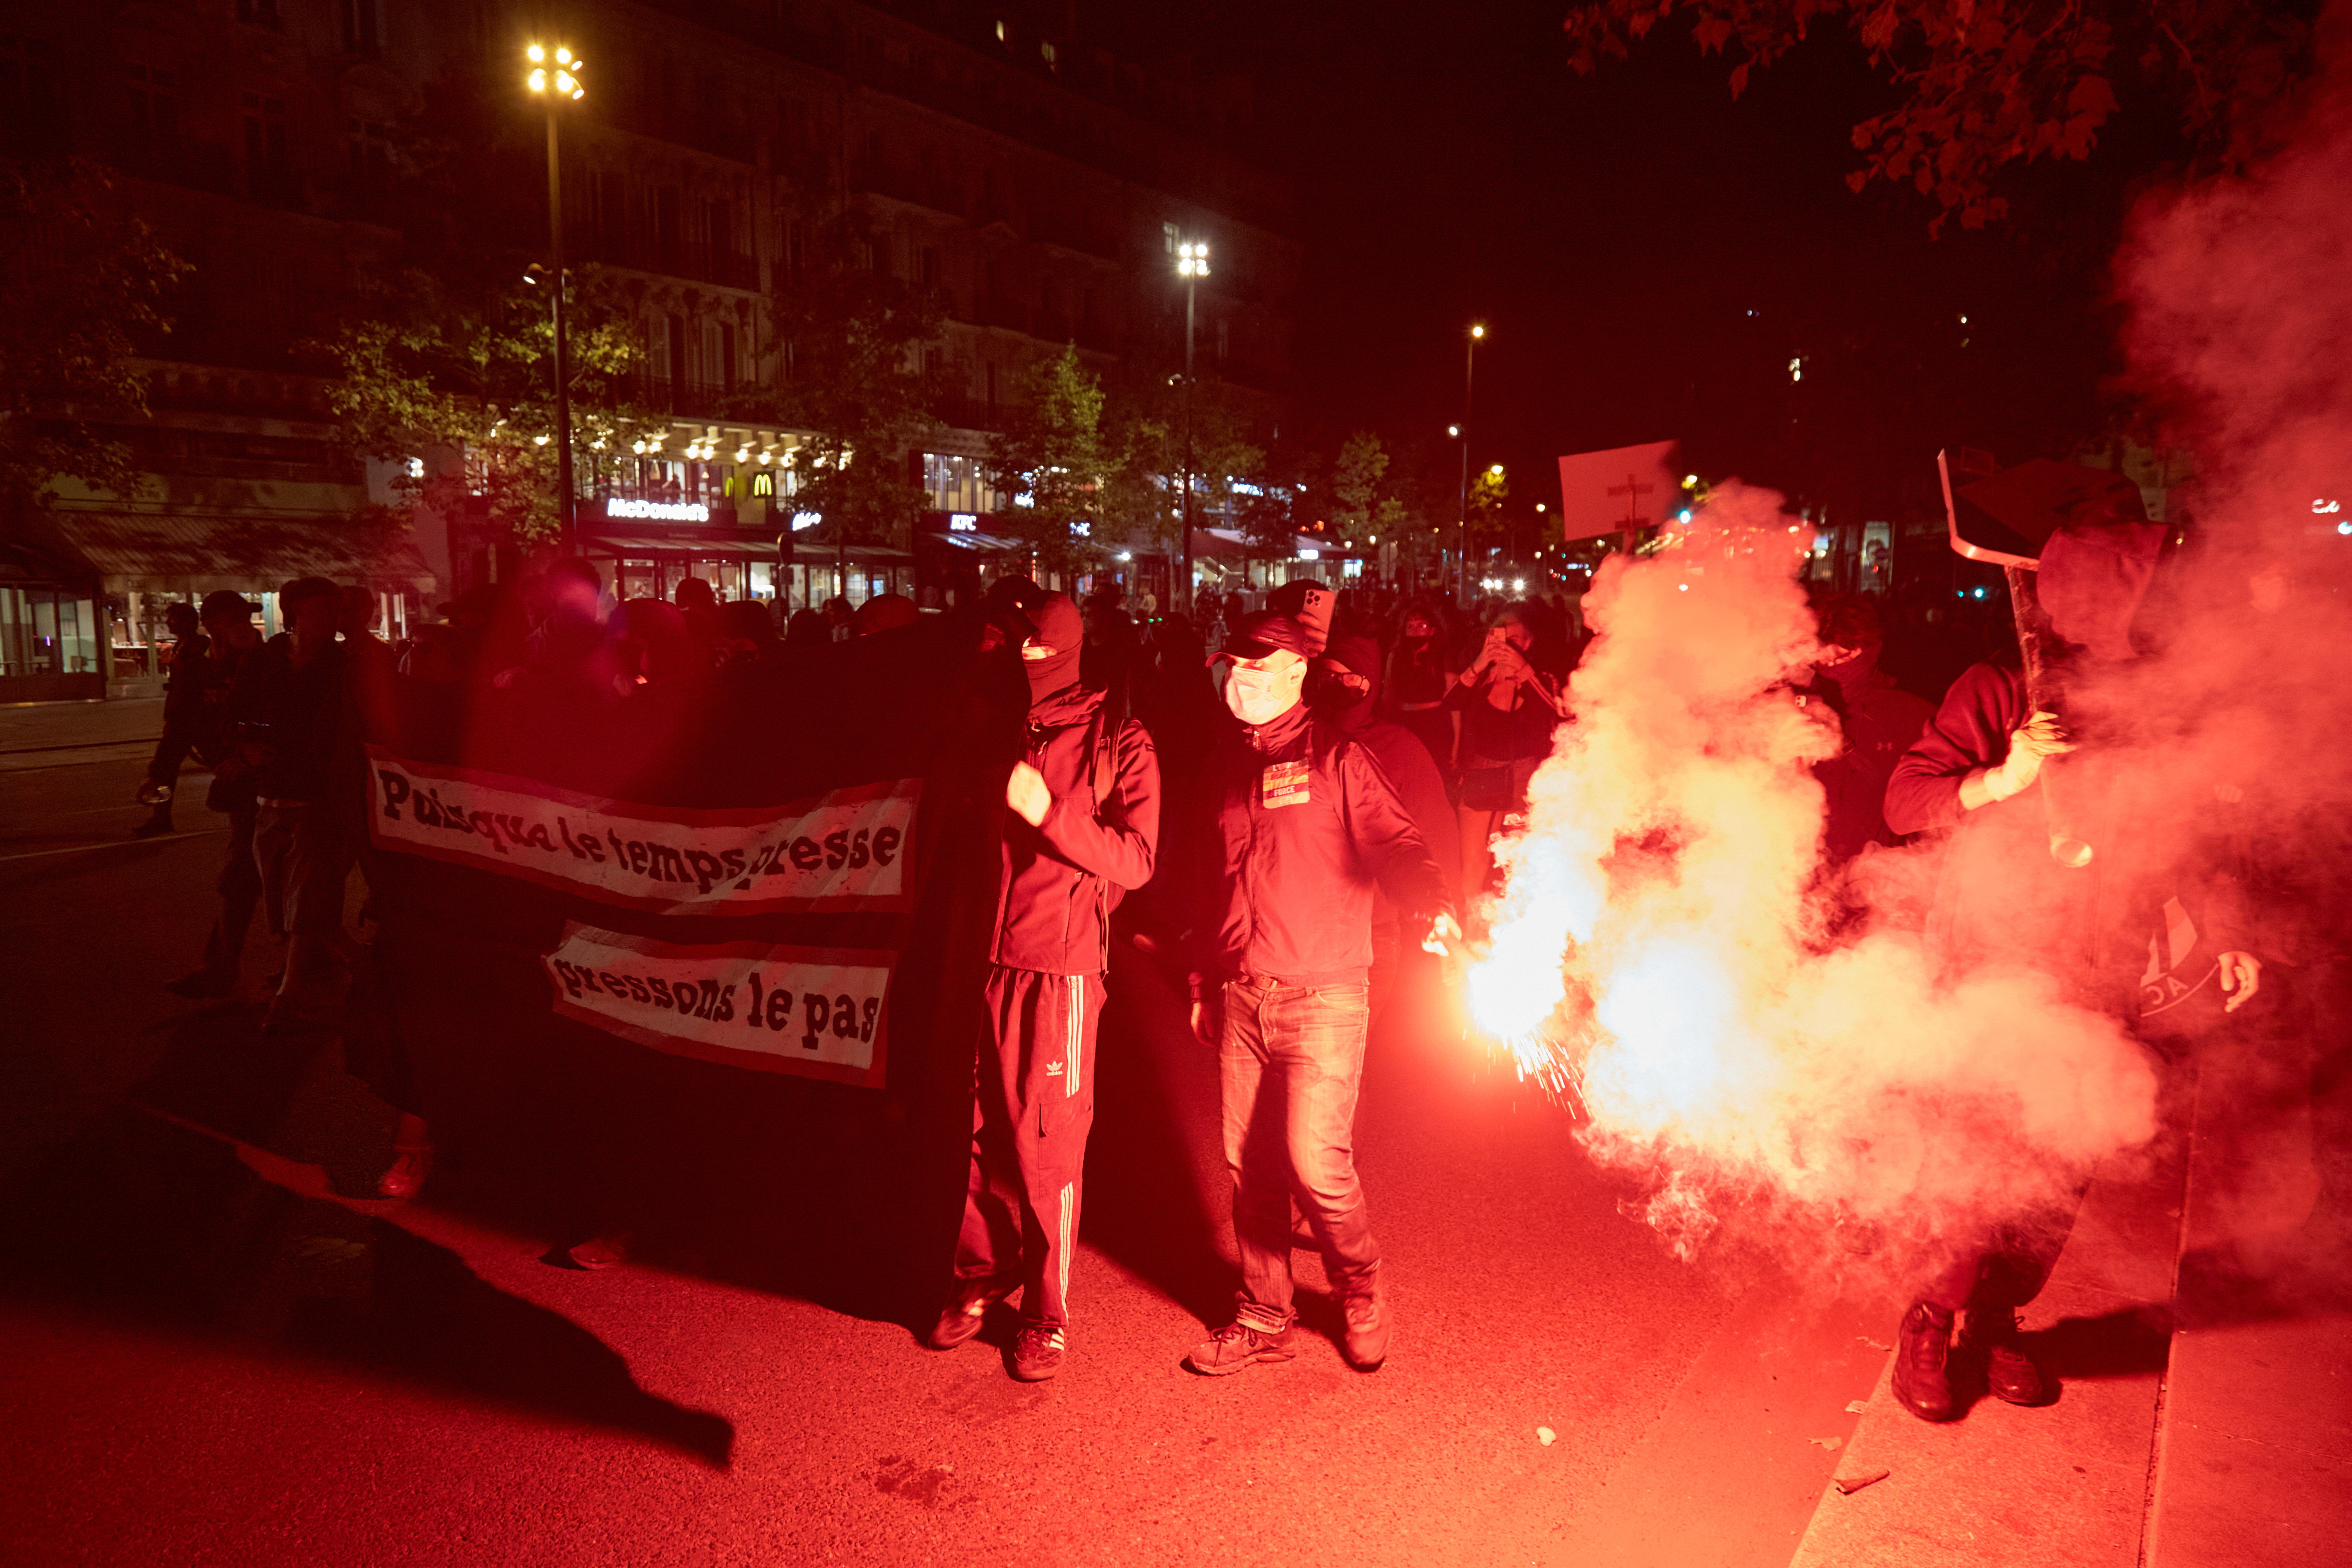 Protesters set off flares as firefighters rushed to the scene on Sunday night